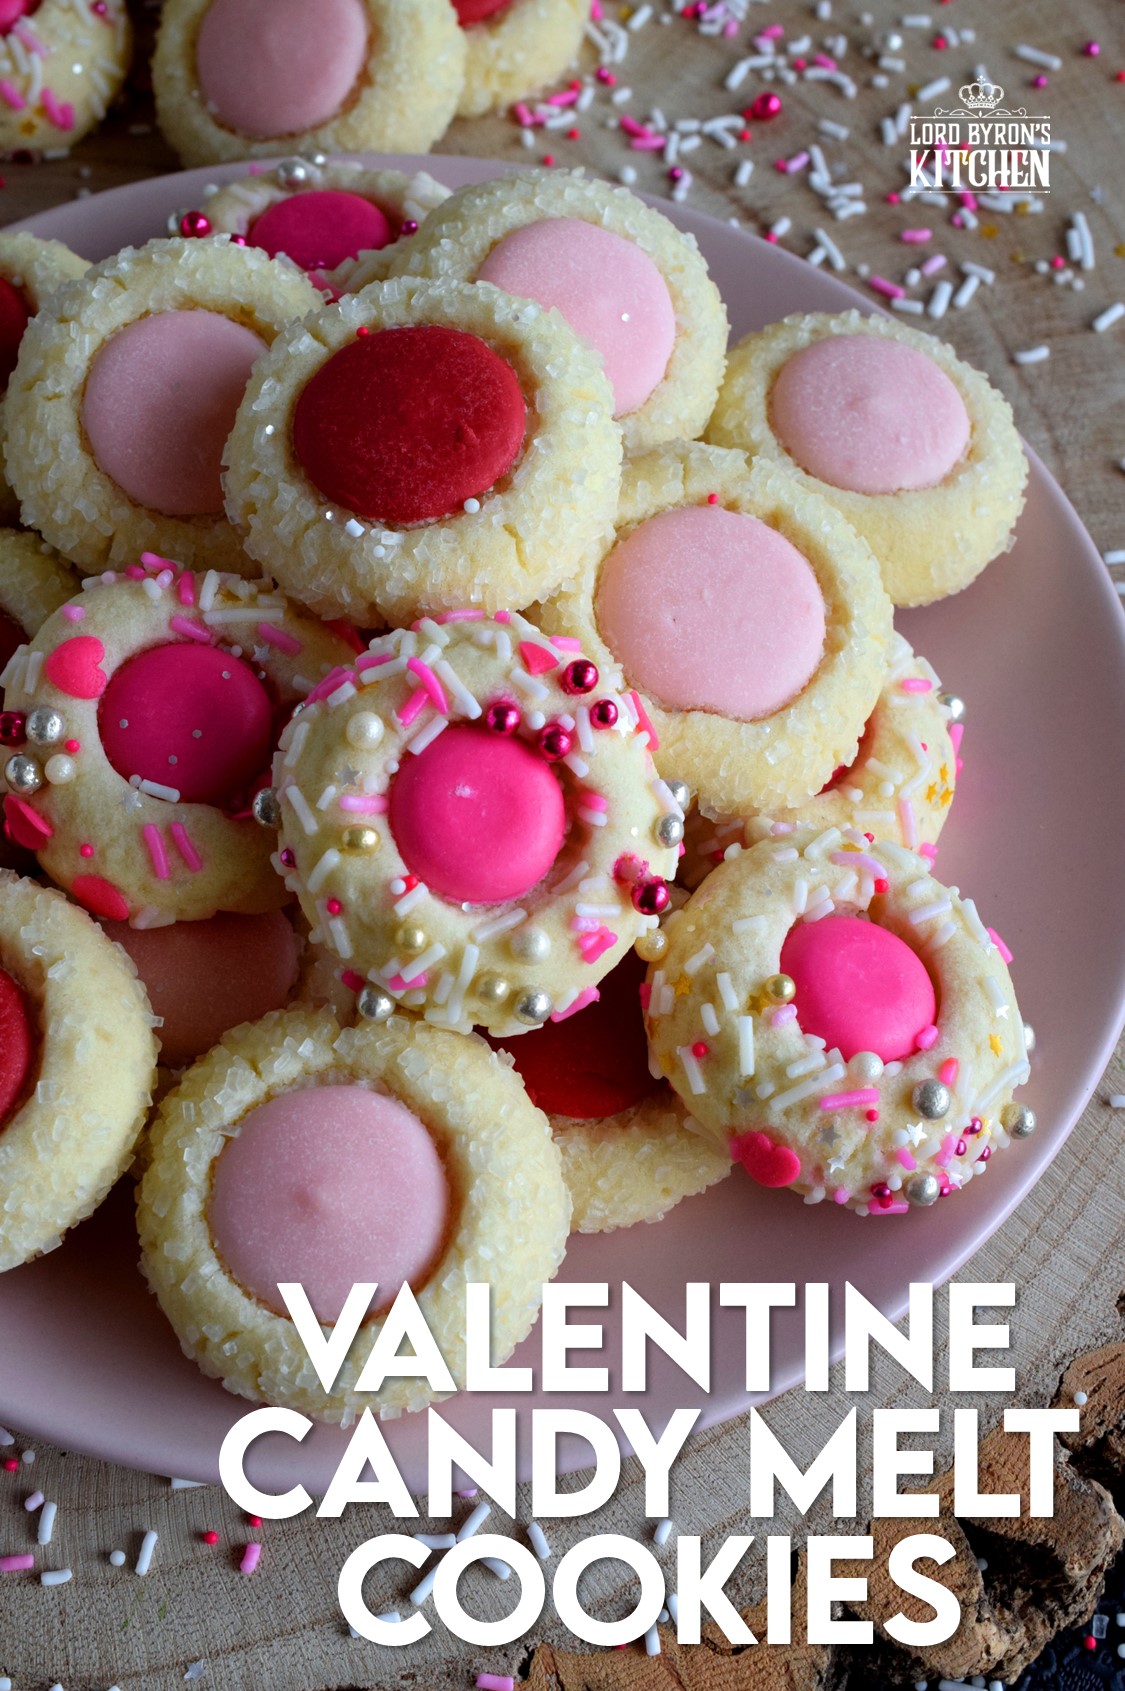 Valentine Candy Melt Cookies - Lord Byron's Kitchen